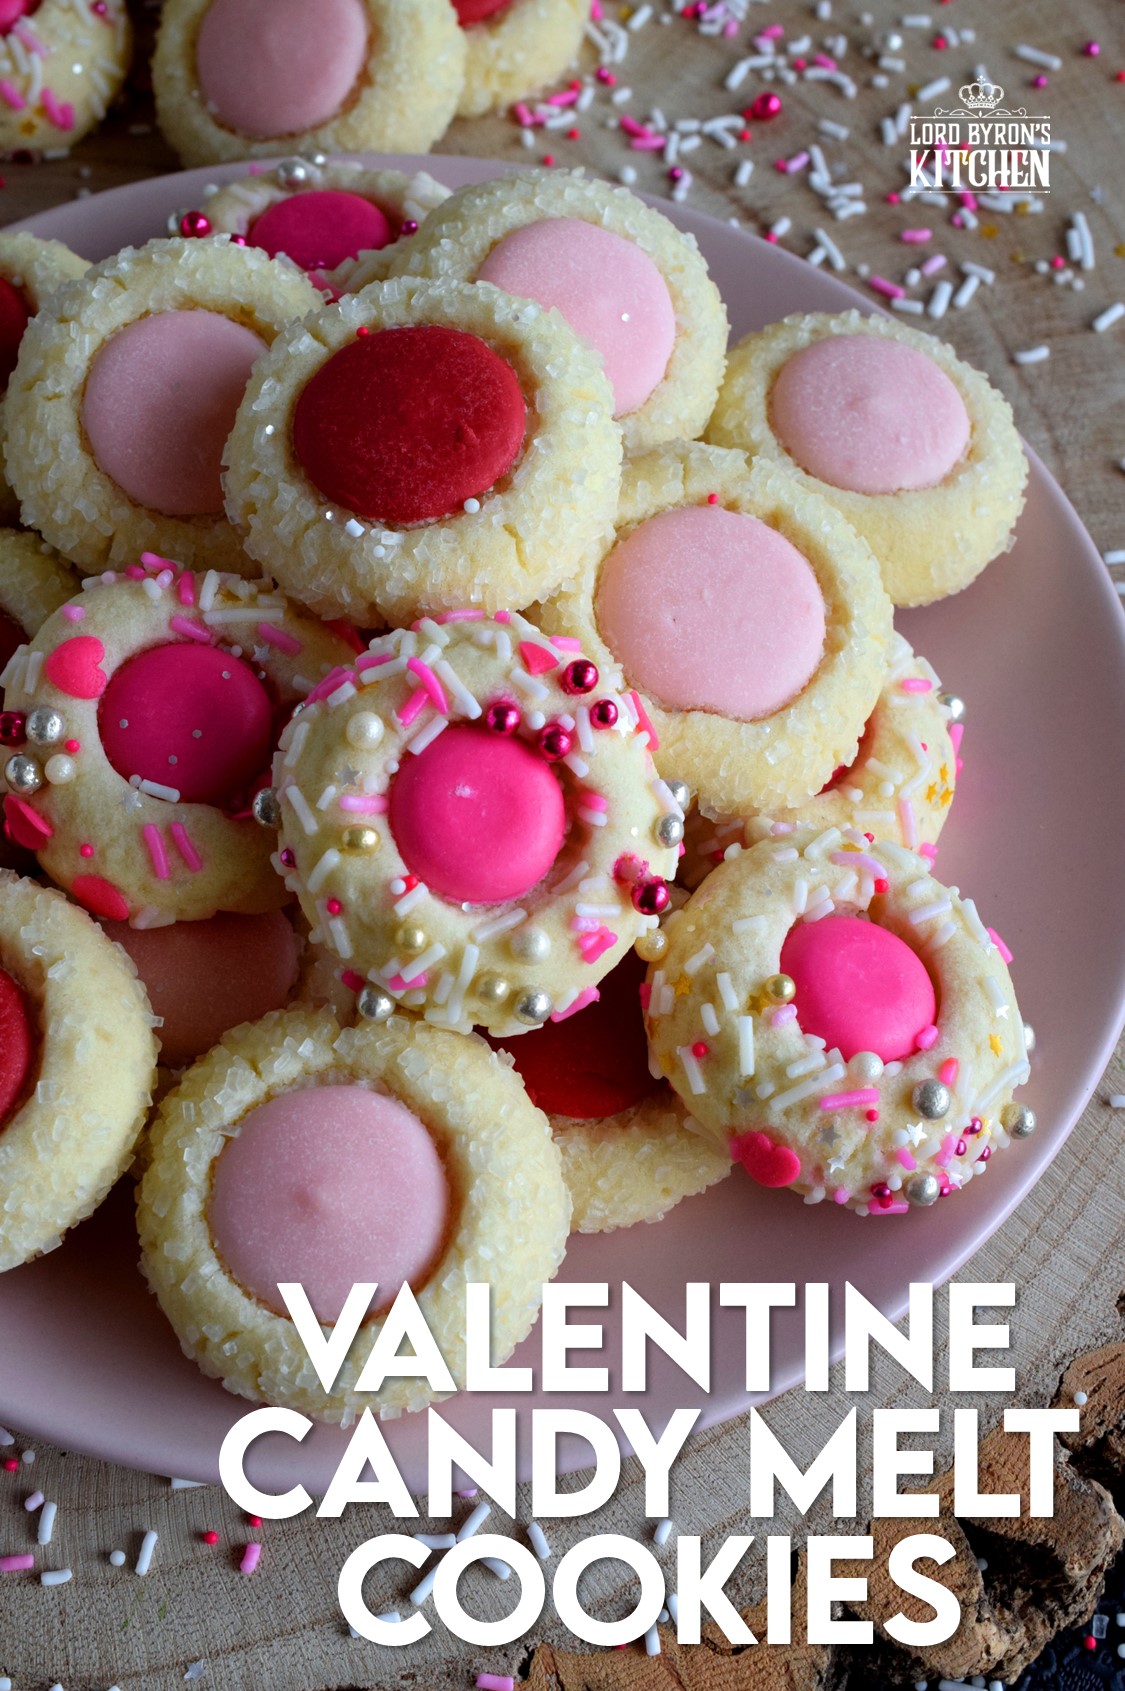 Valentine Candy Melt Cookies - Lord Byron's Kitchen